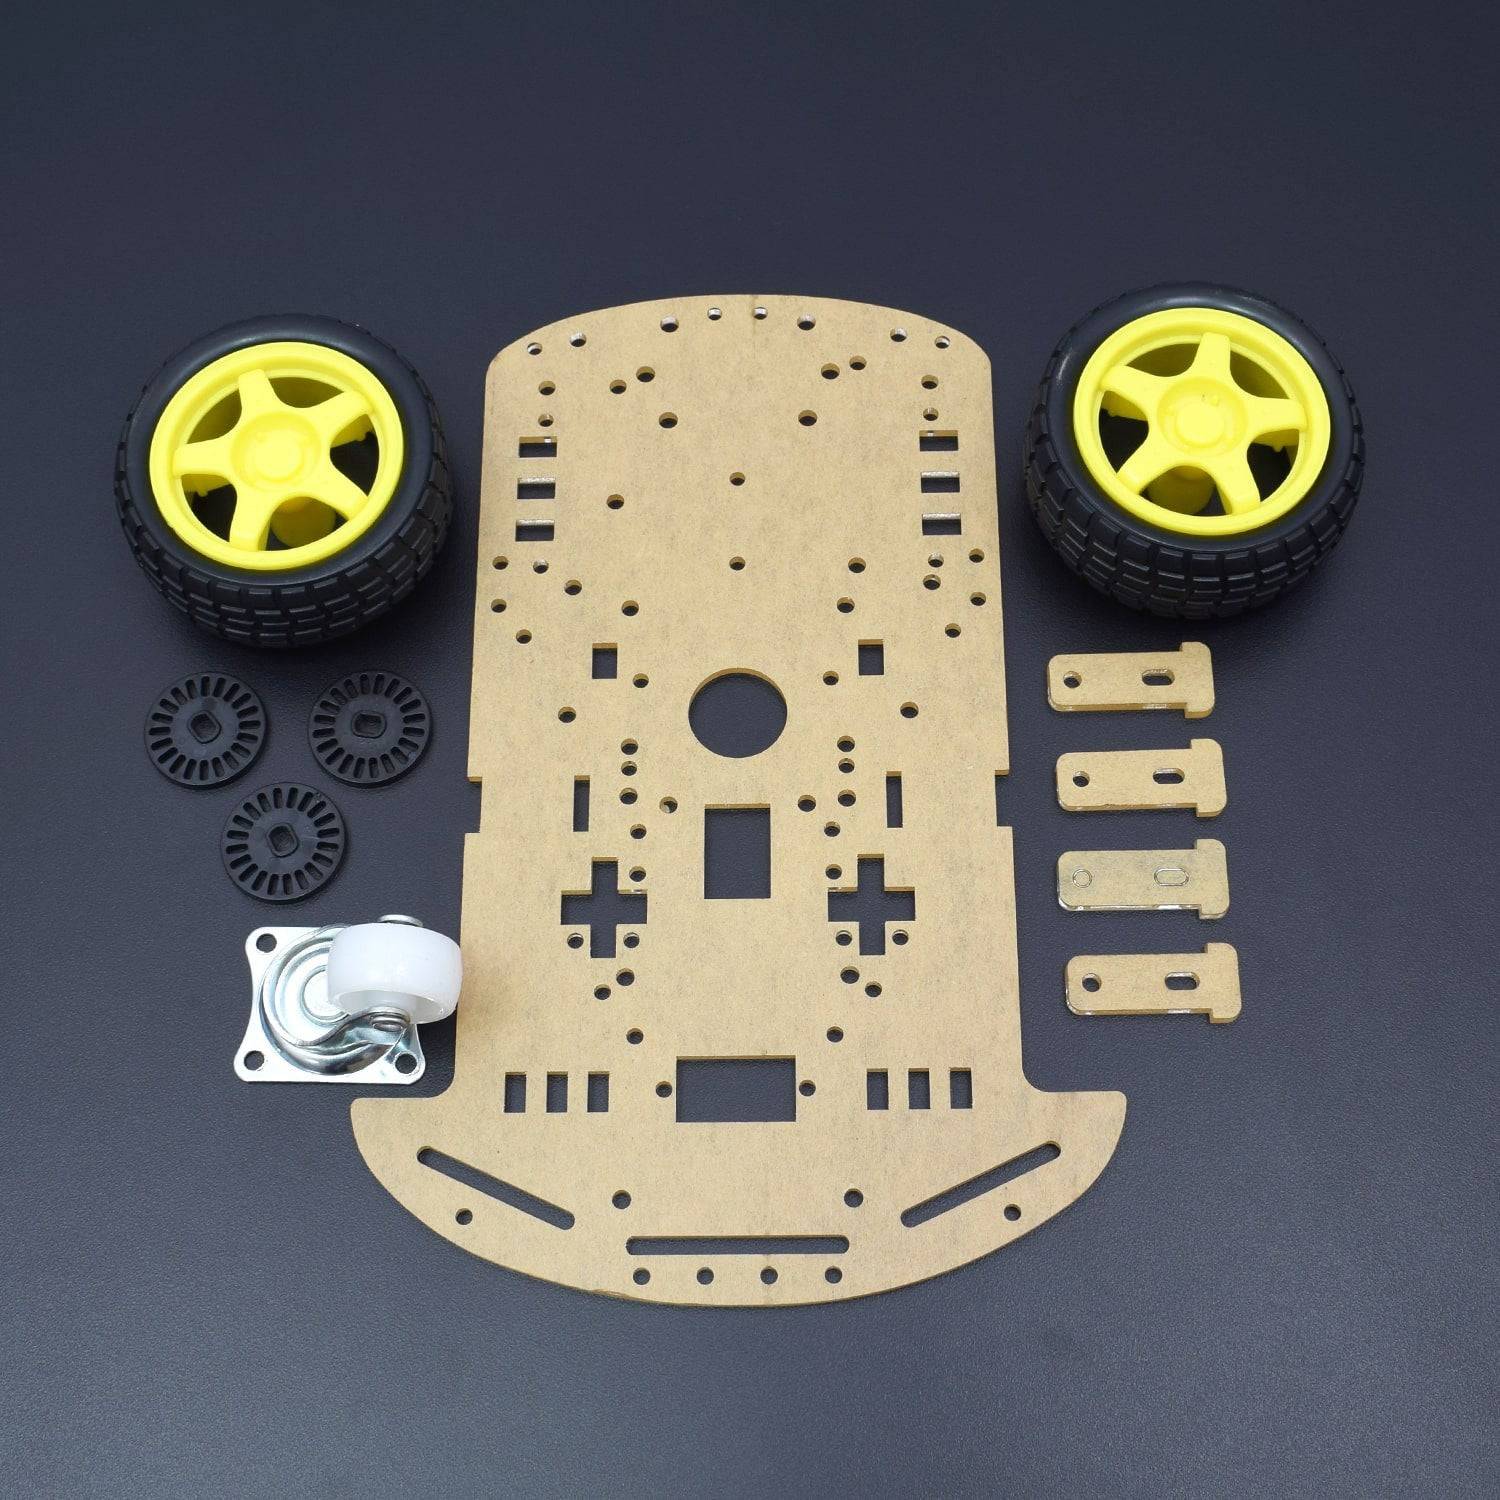 Make a Line Follower Robot Car Using L293d Motor Driver IC And BO Motor Dual Shaft - KT858 - REES52